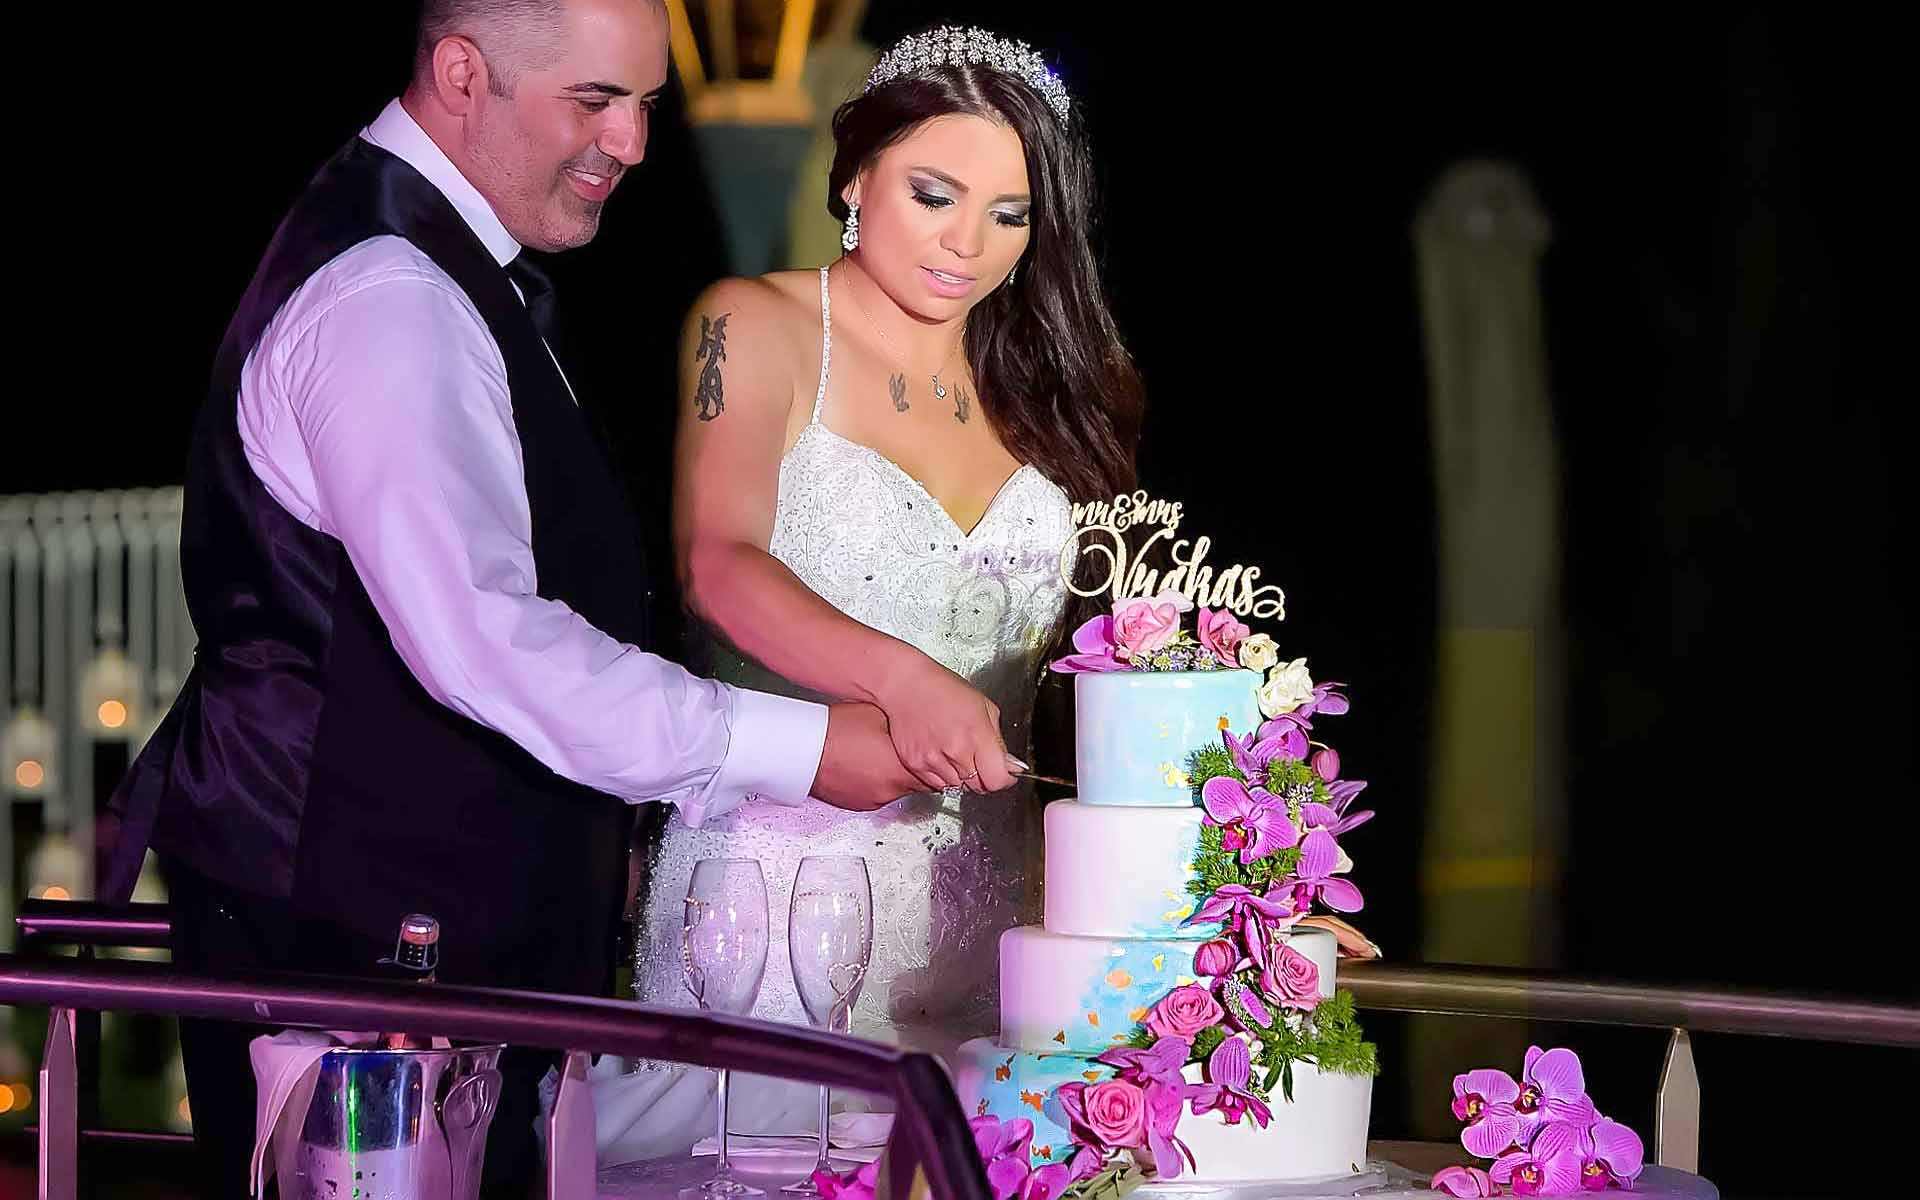 Cutting-The-Cake-Is-A-Romantic-Symbolic-Moment-On-Every-Wedding-Day